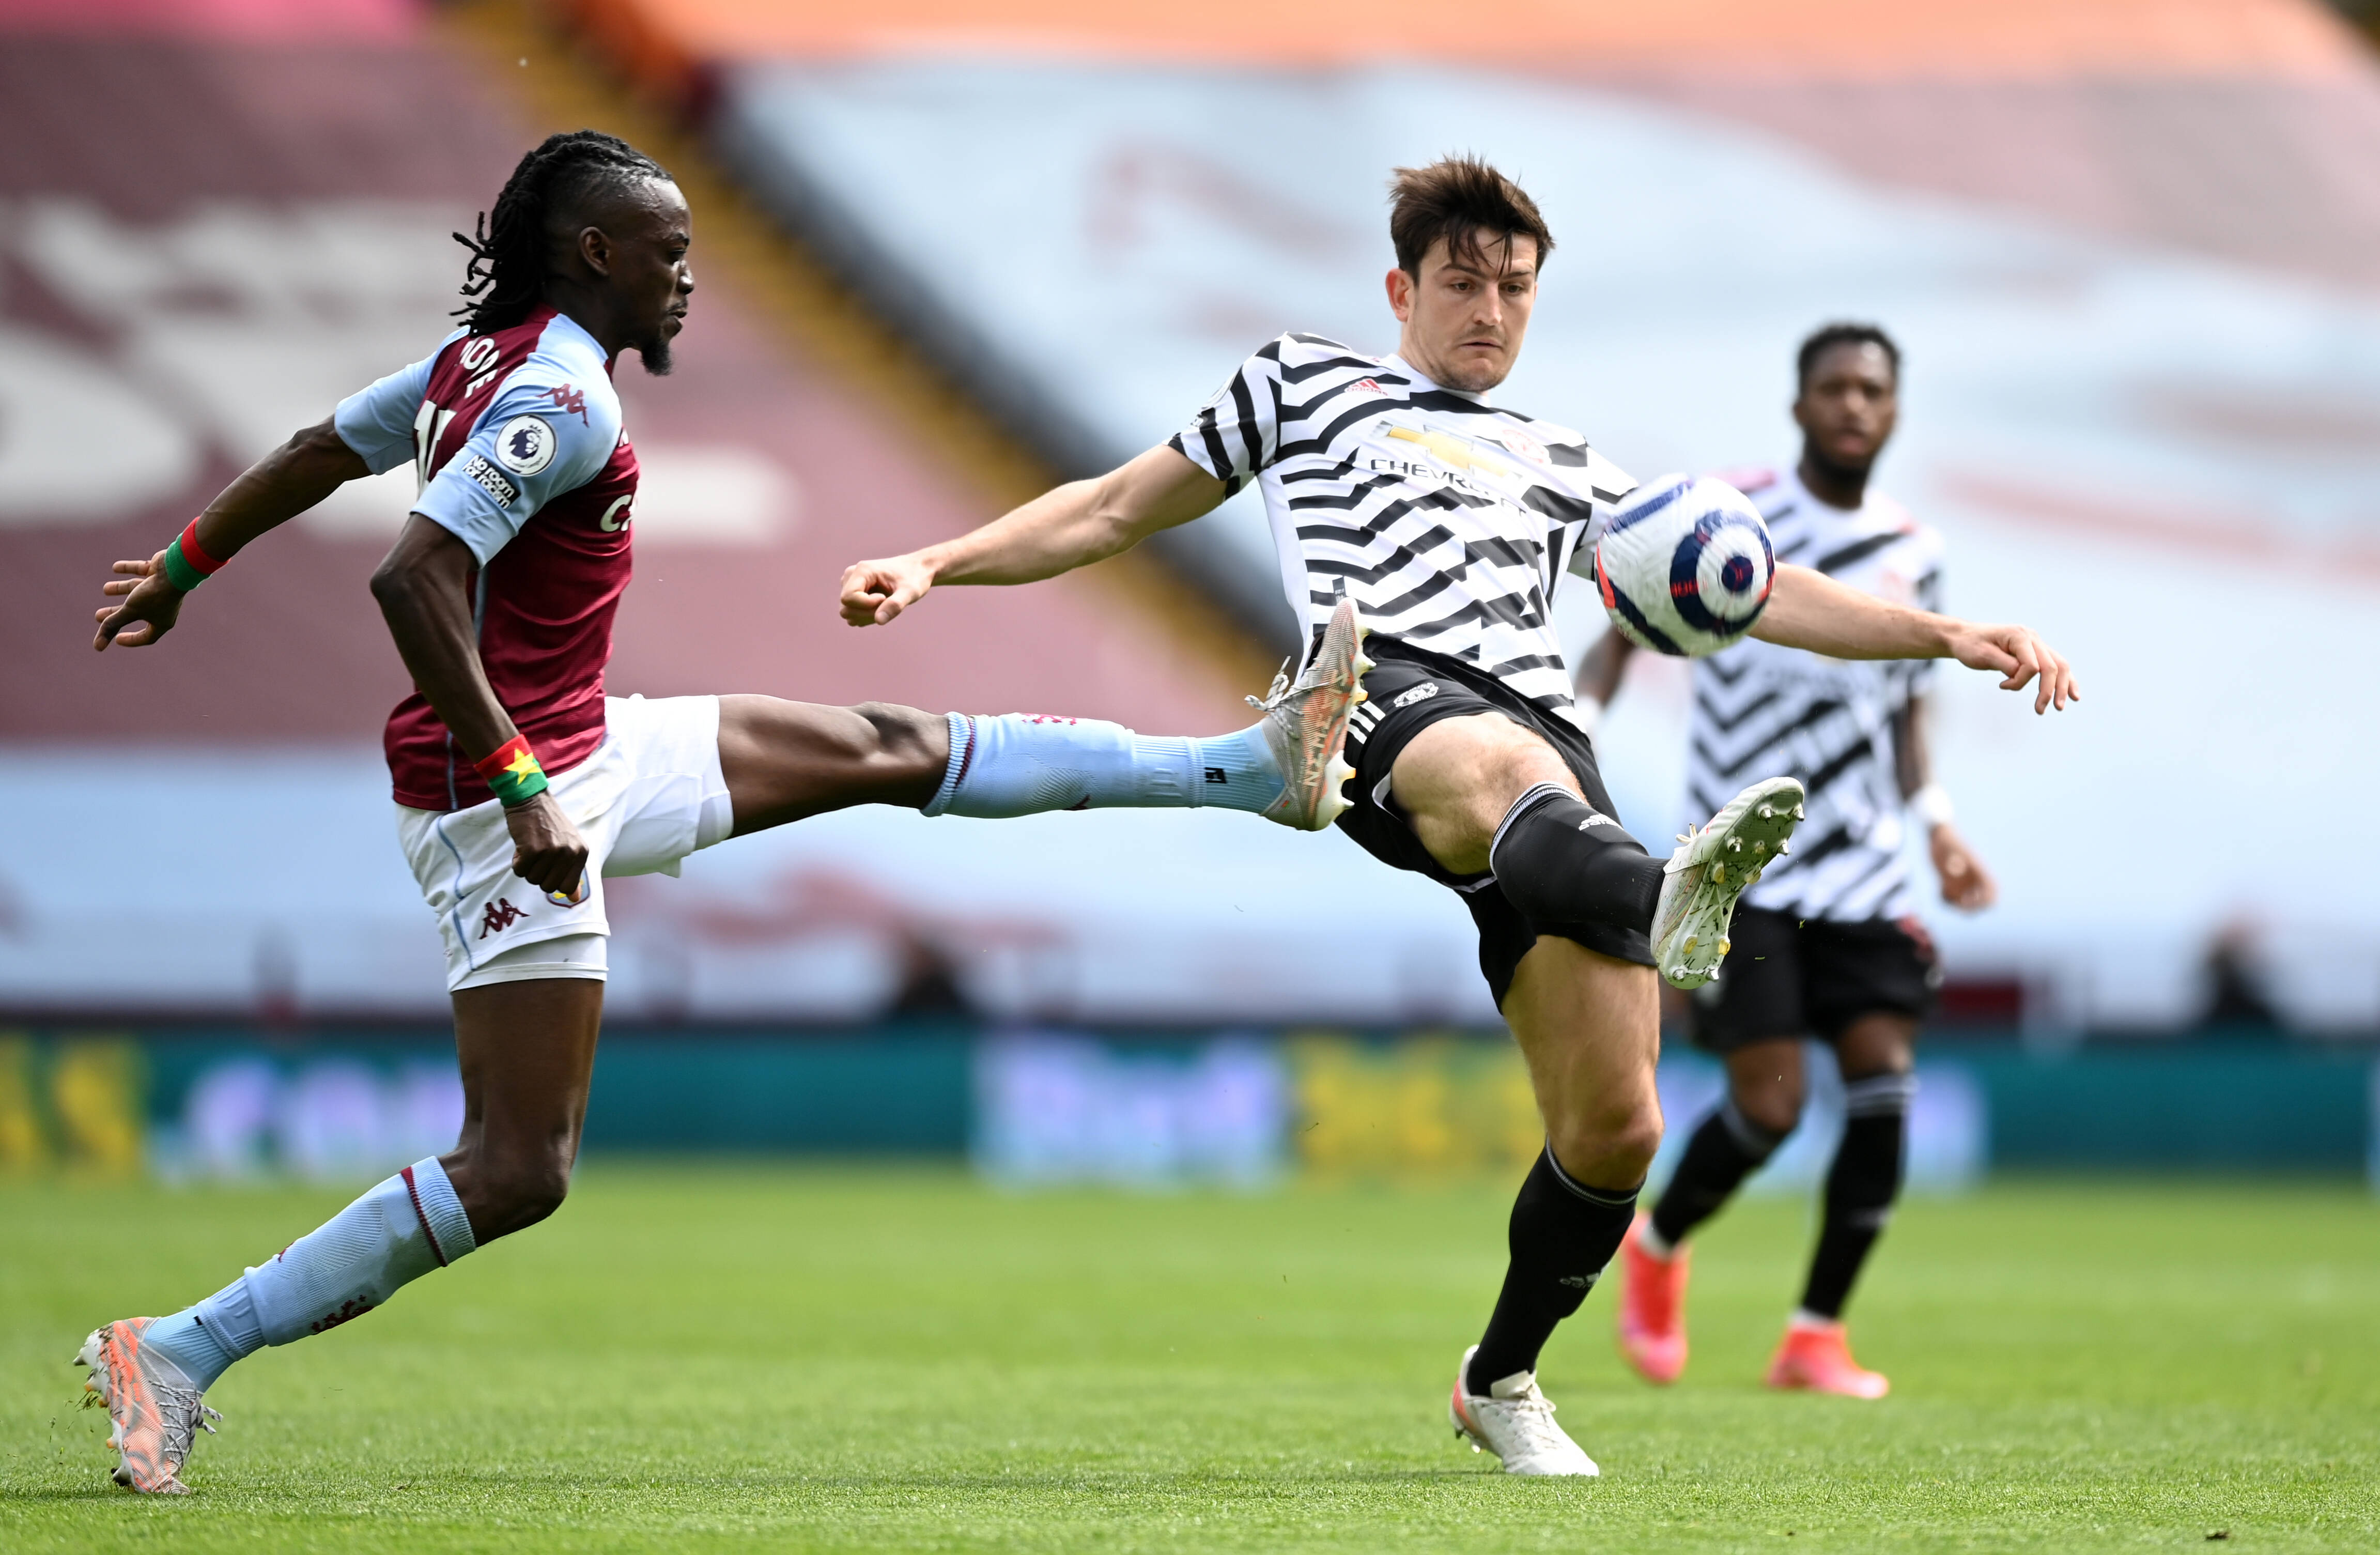 Harry Maguire in action for Manchester United vs Villa